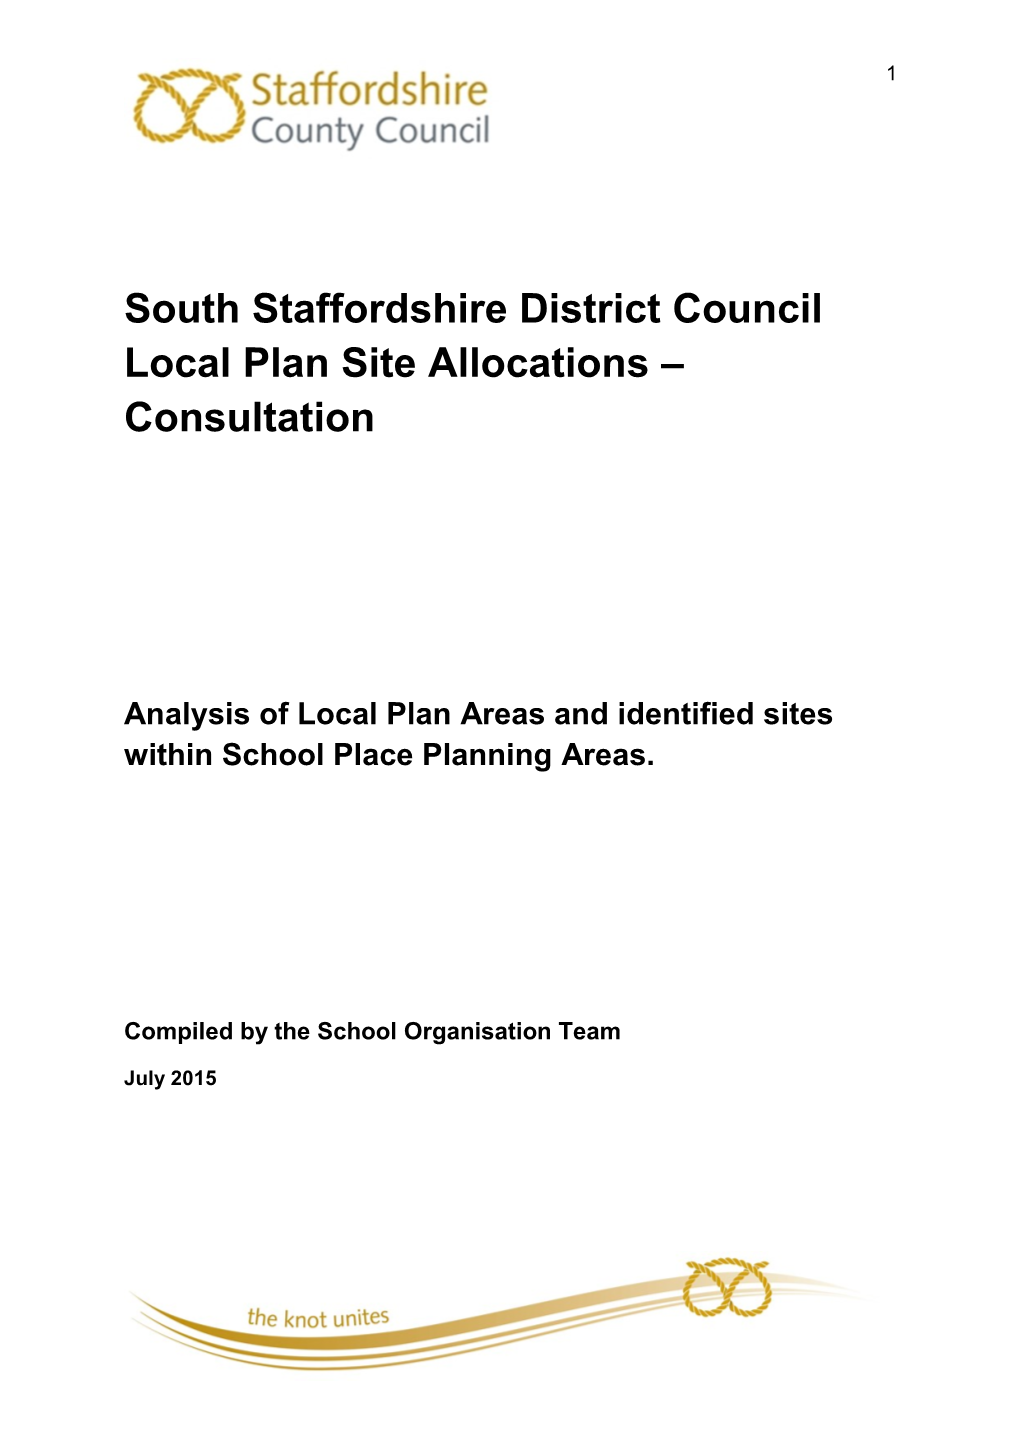 South Staffordshire District Council Local Plan Site Allocations – Consultation